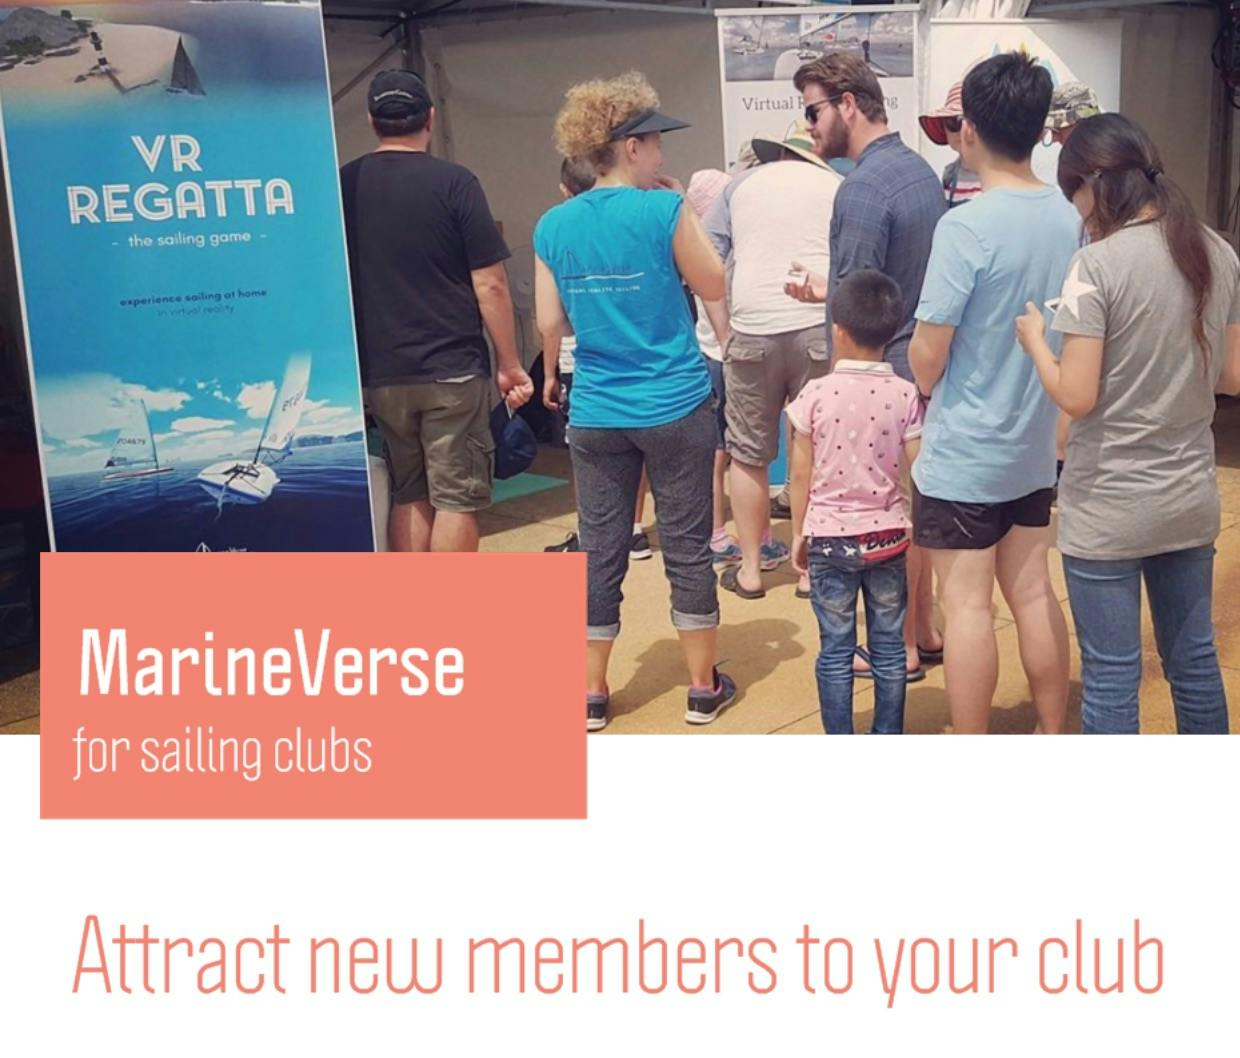 VR for sailing clubs